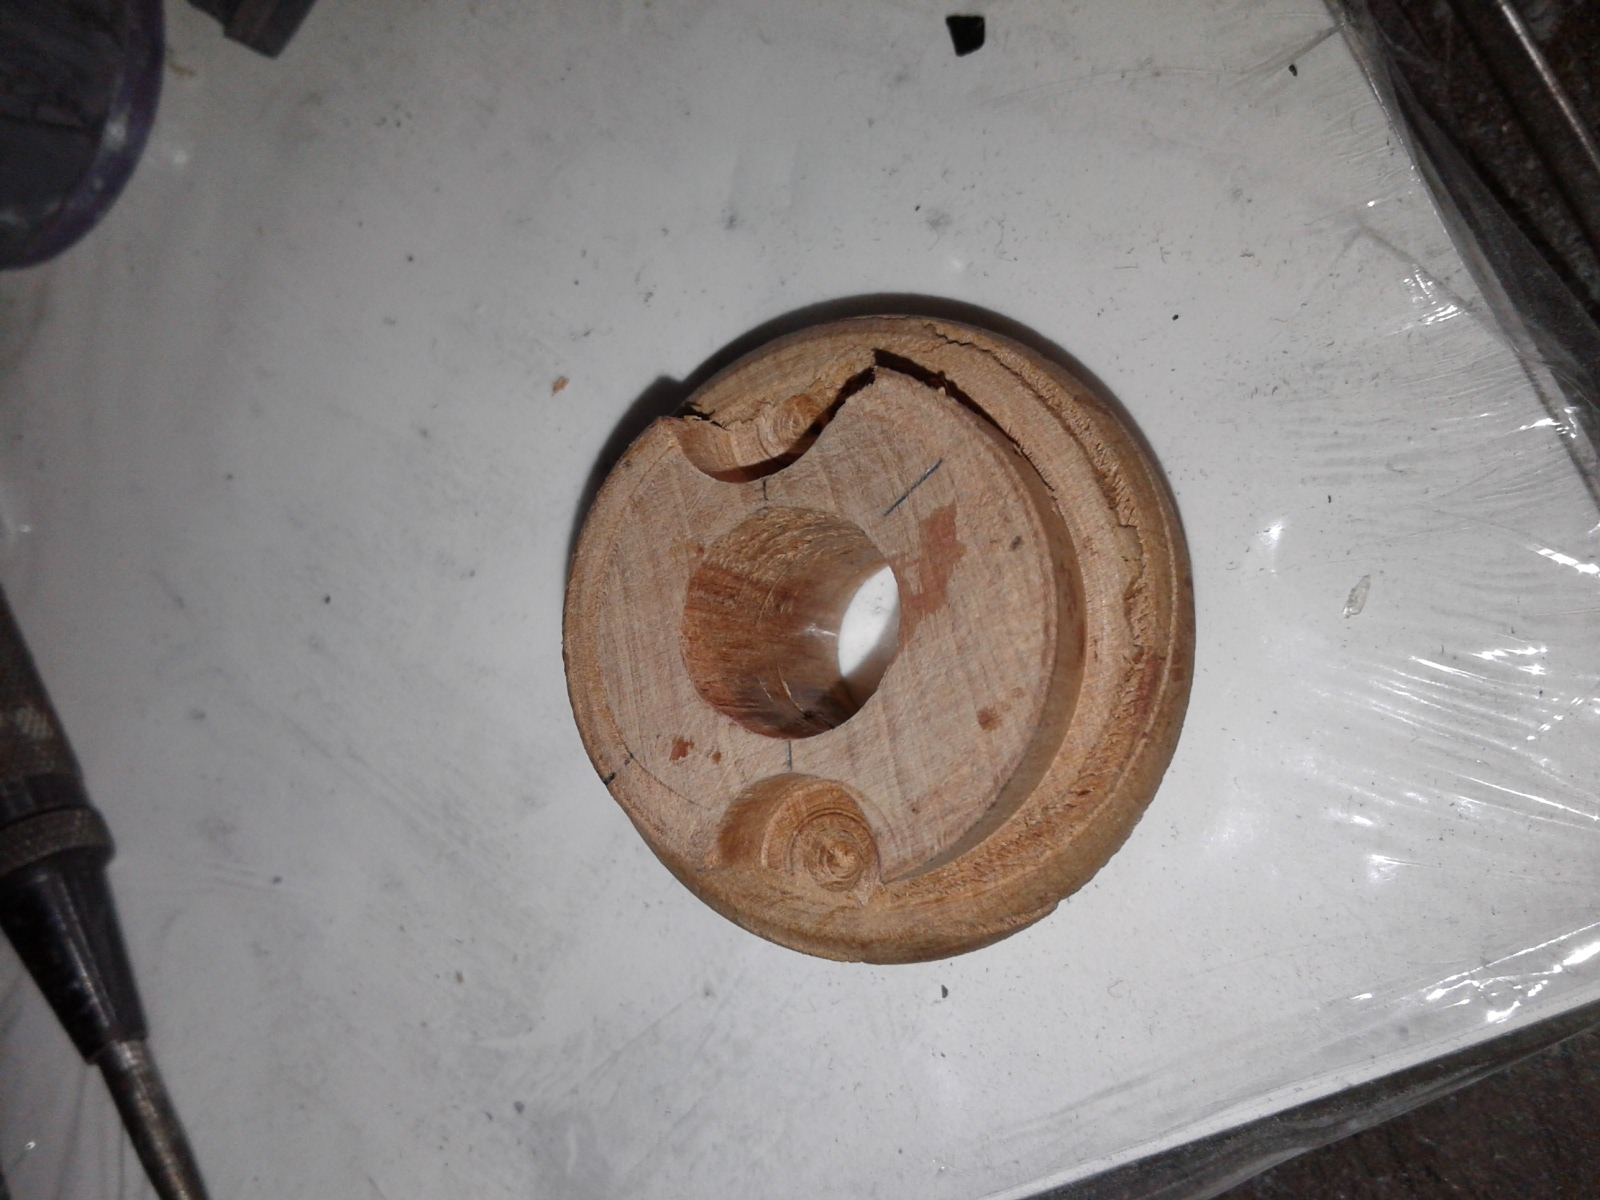 Nozzle End after turning on Blaxmyths Wood Lathe